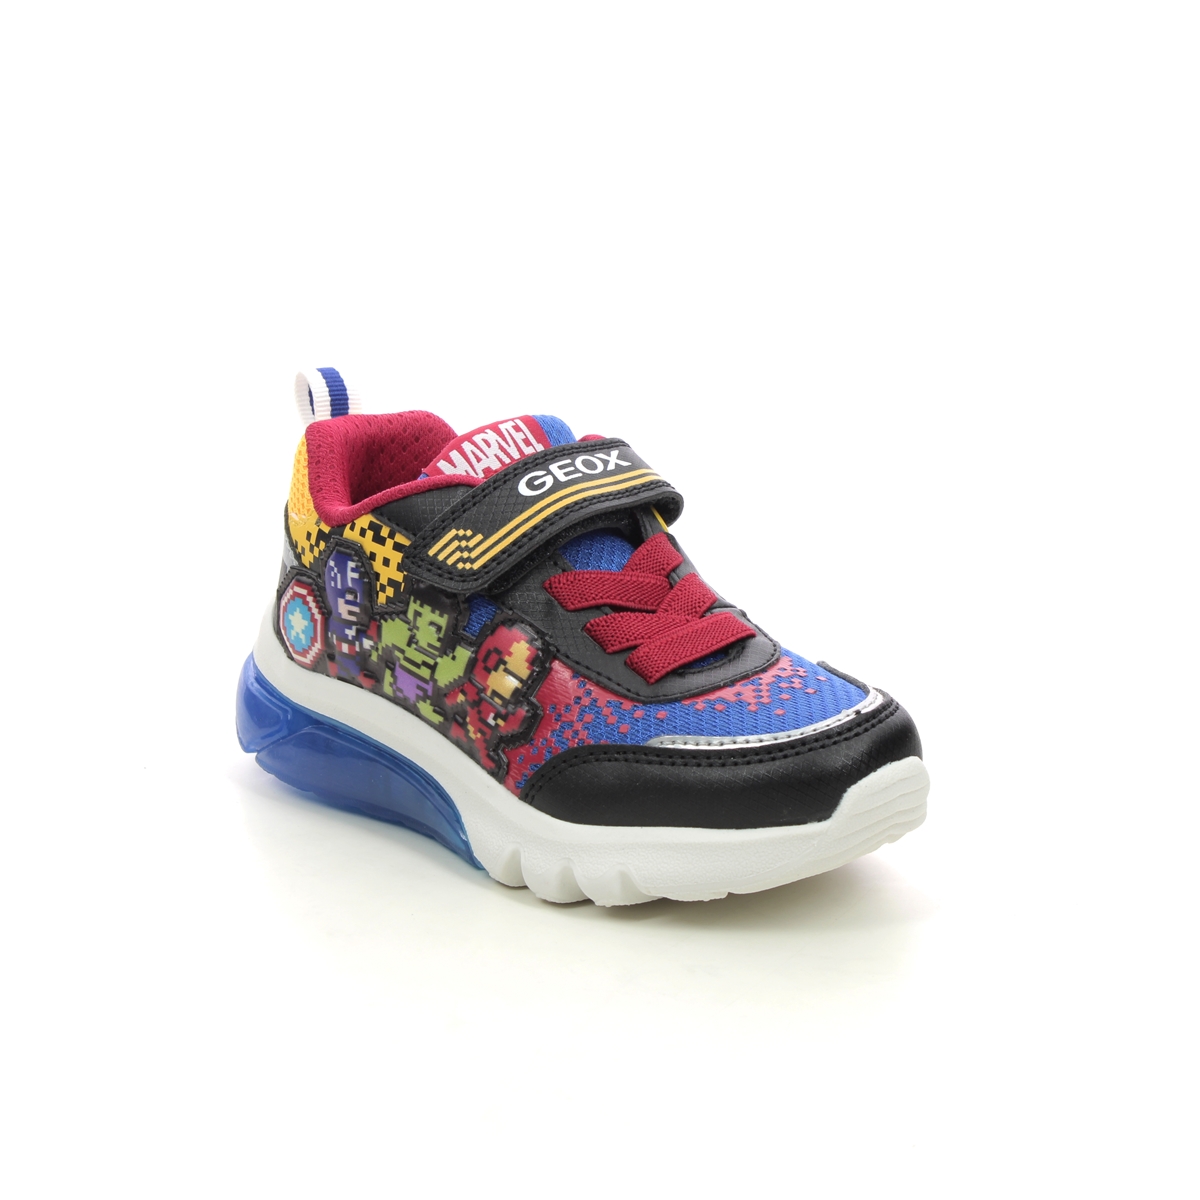 Geox Avengers Marvel Multi Coloured Kids trainers J45LBE-C0245 in a Plain Man-made in Size 27